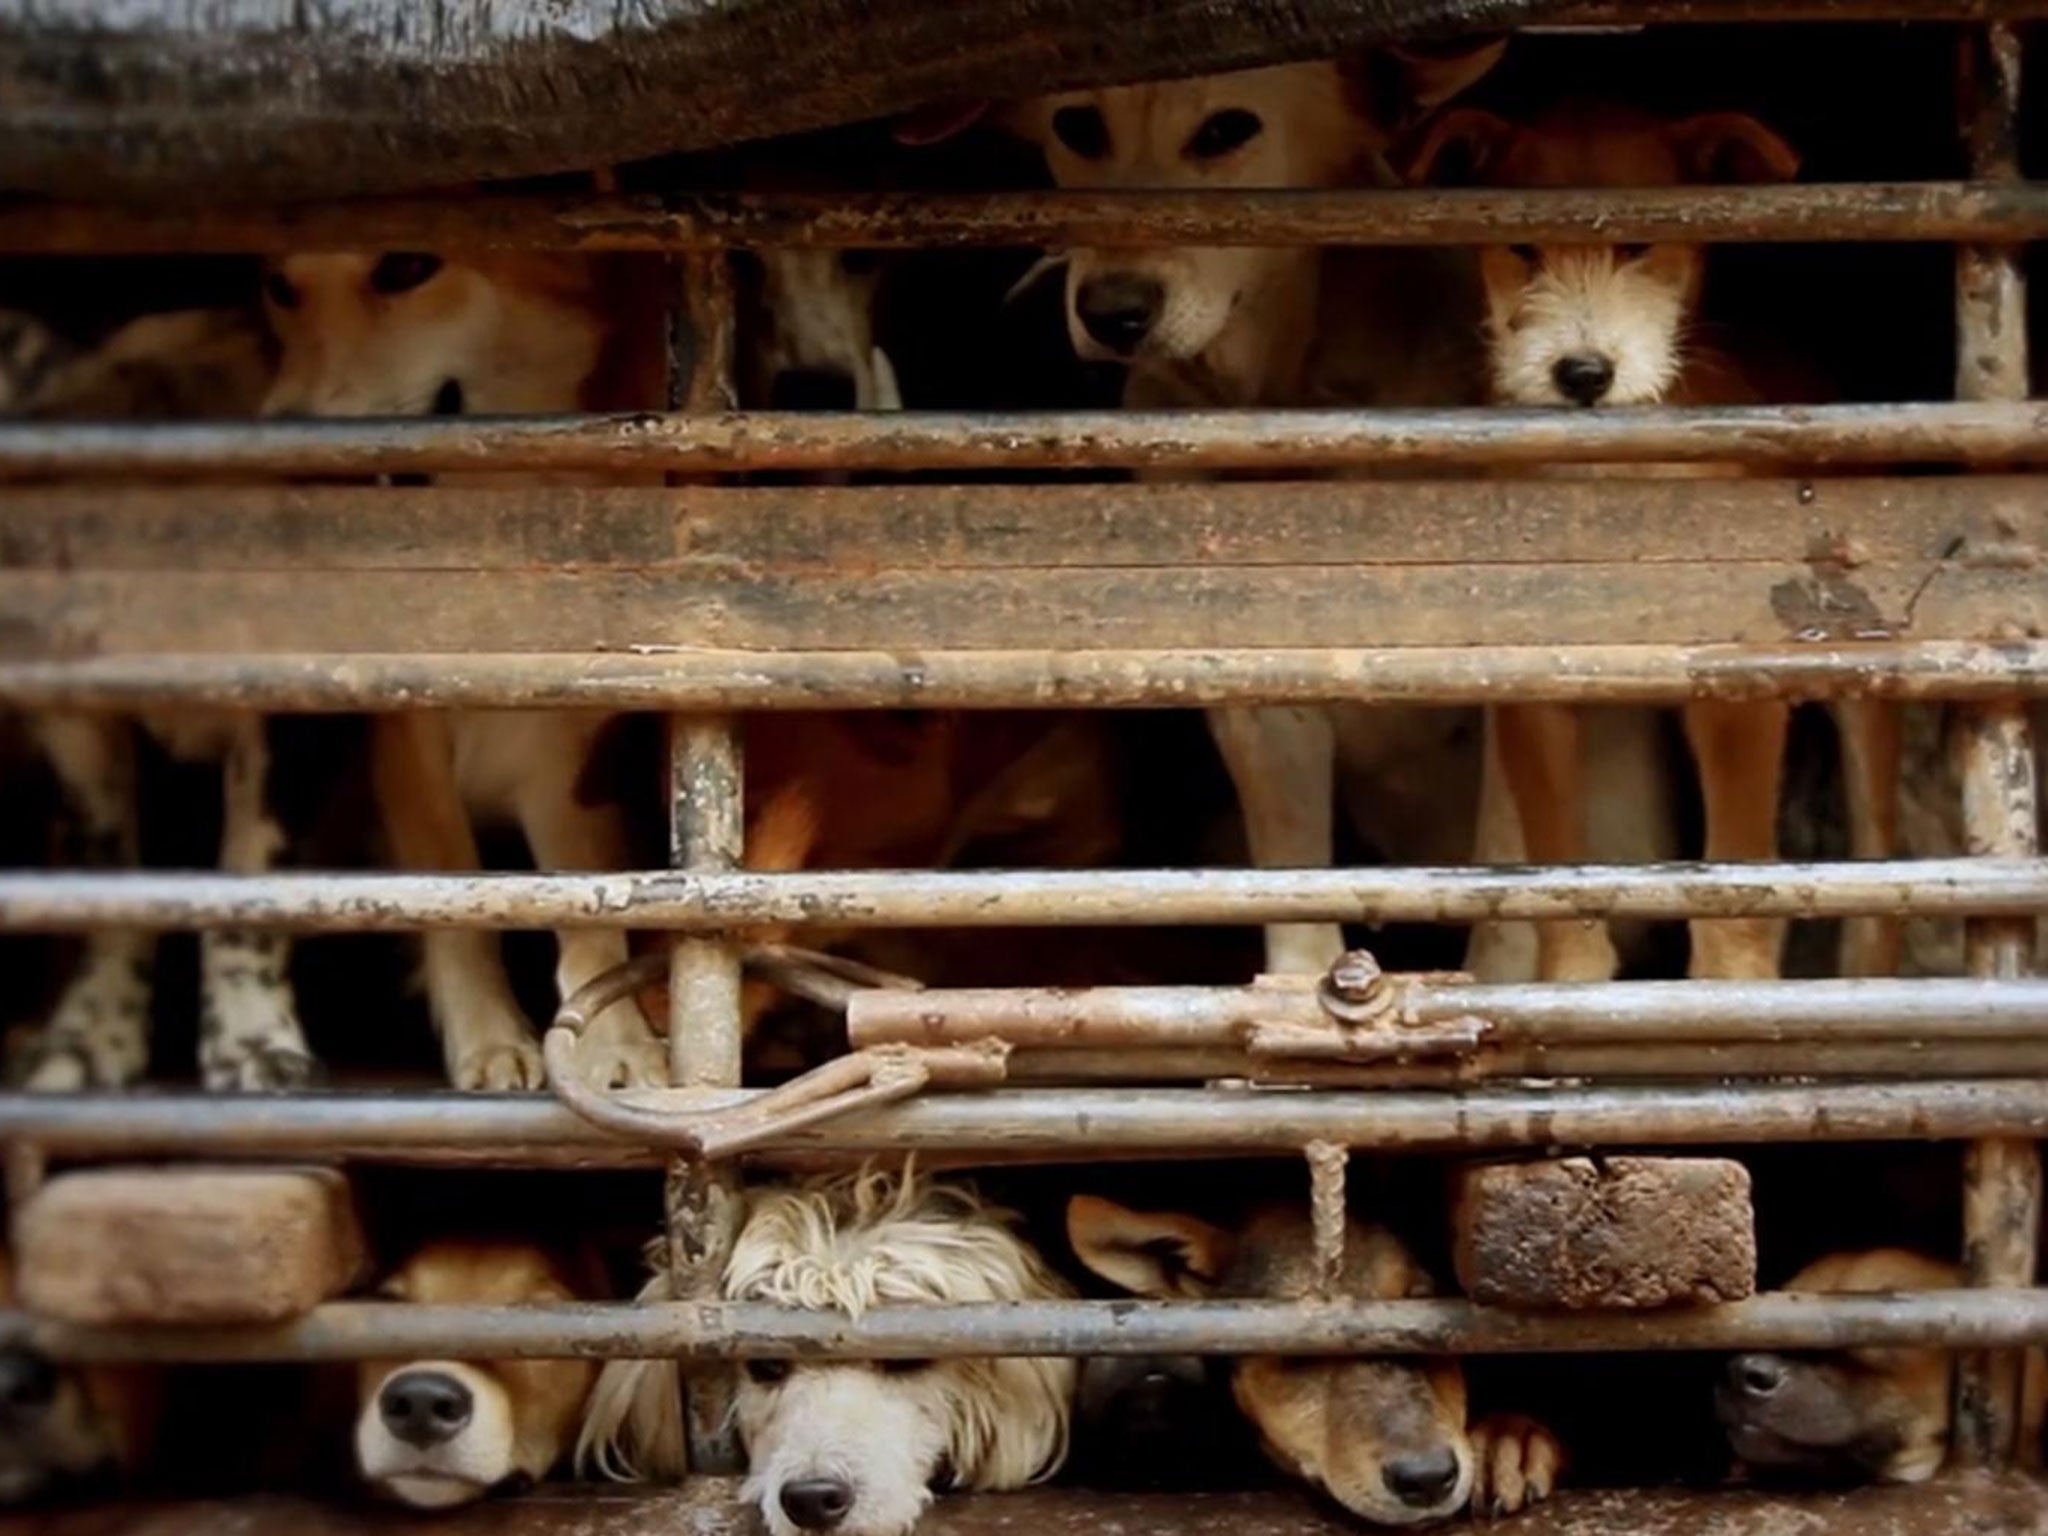 Dogs being taken to a slaughterhouse in Thailand